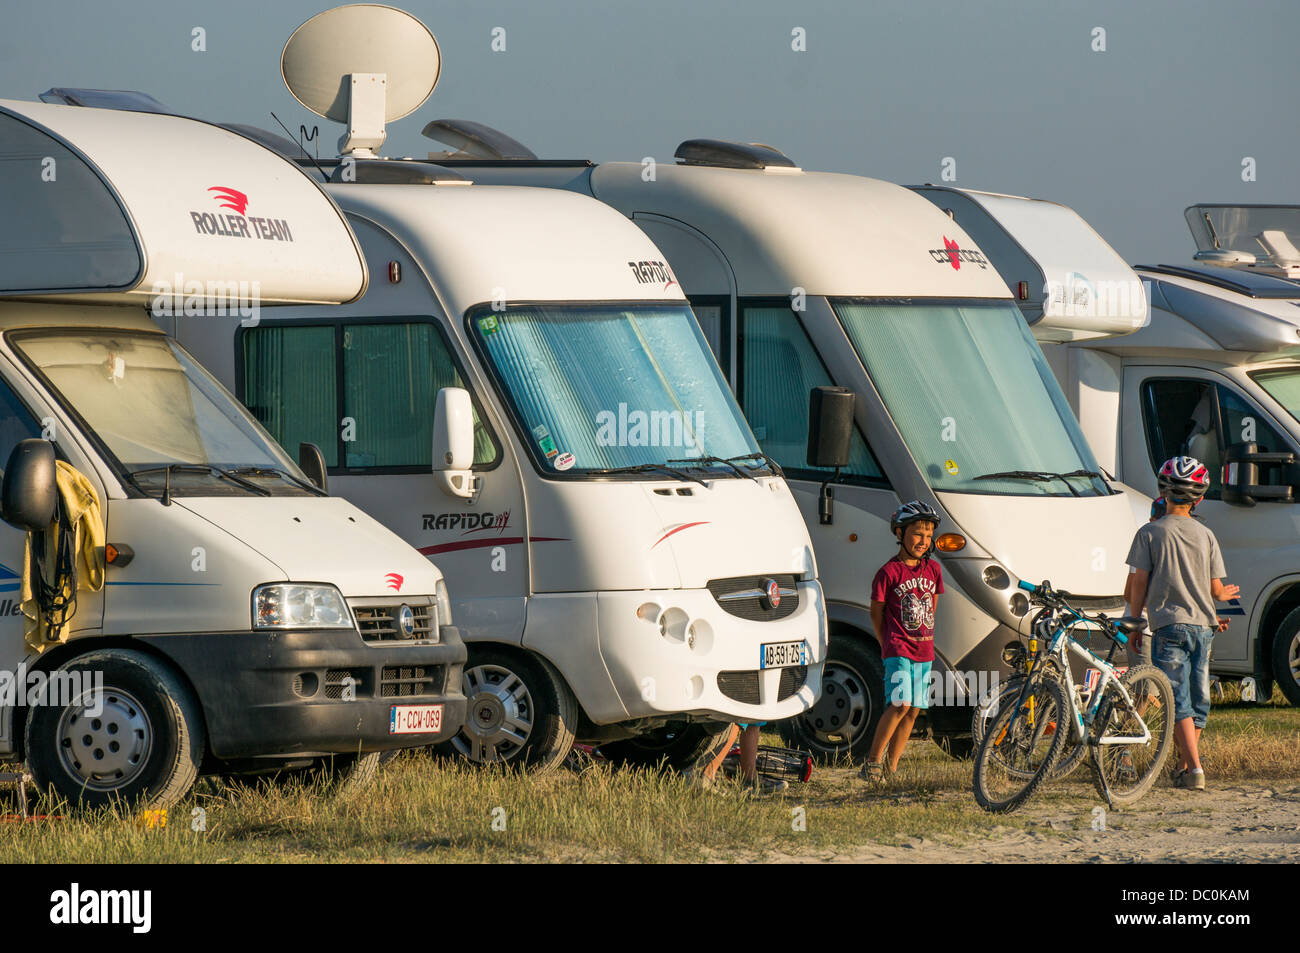 A row of motorhomes and two young boys with bicycles, playing on the aire de camping, Le Crotoy, Somme department, Picardie, northern France, Europe. Stock Photo